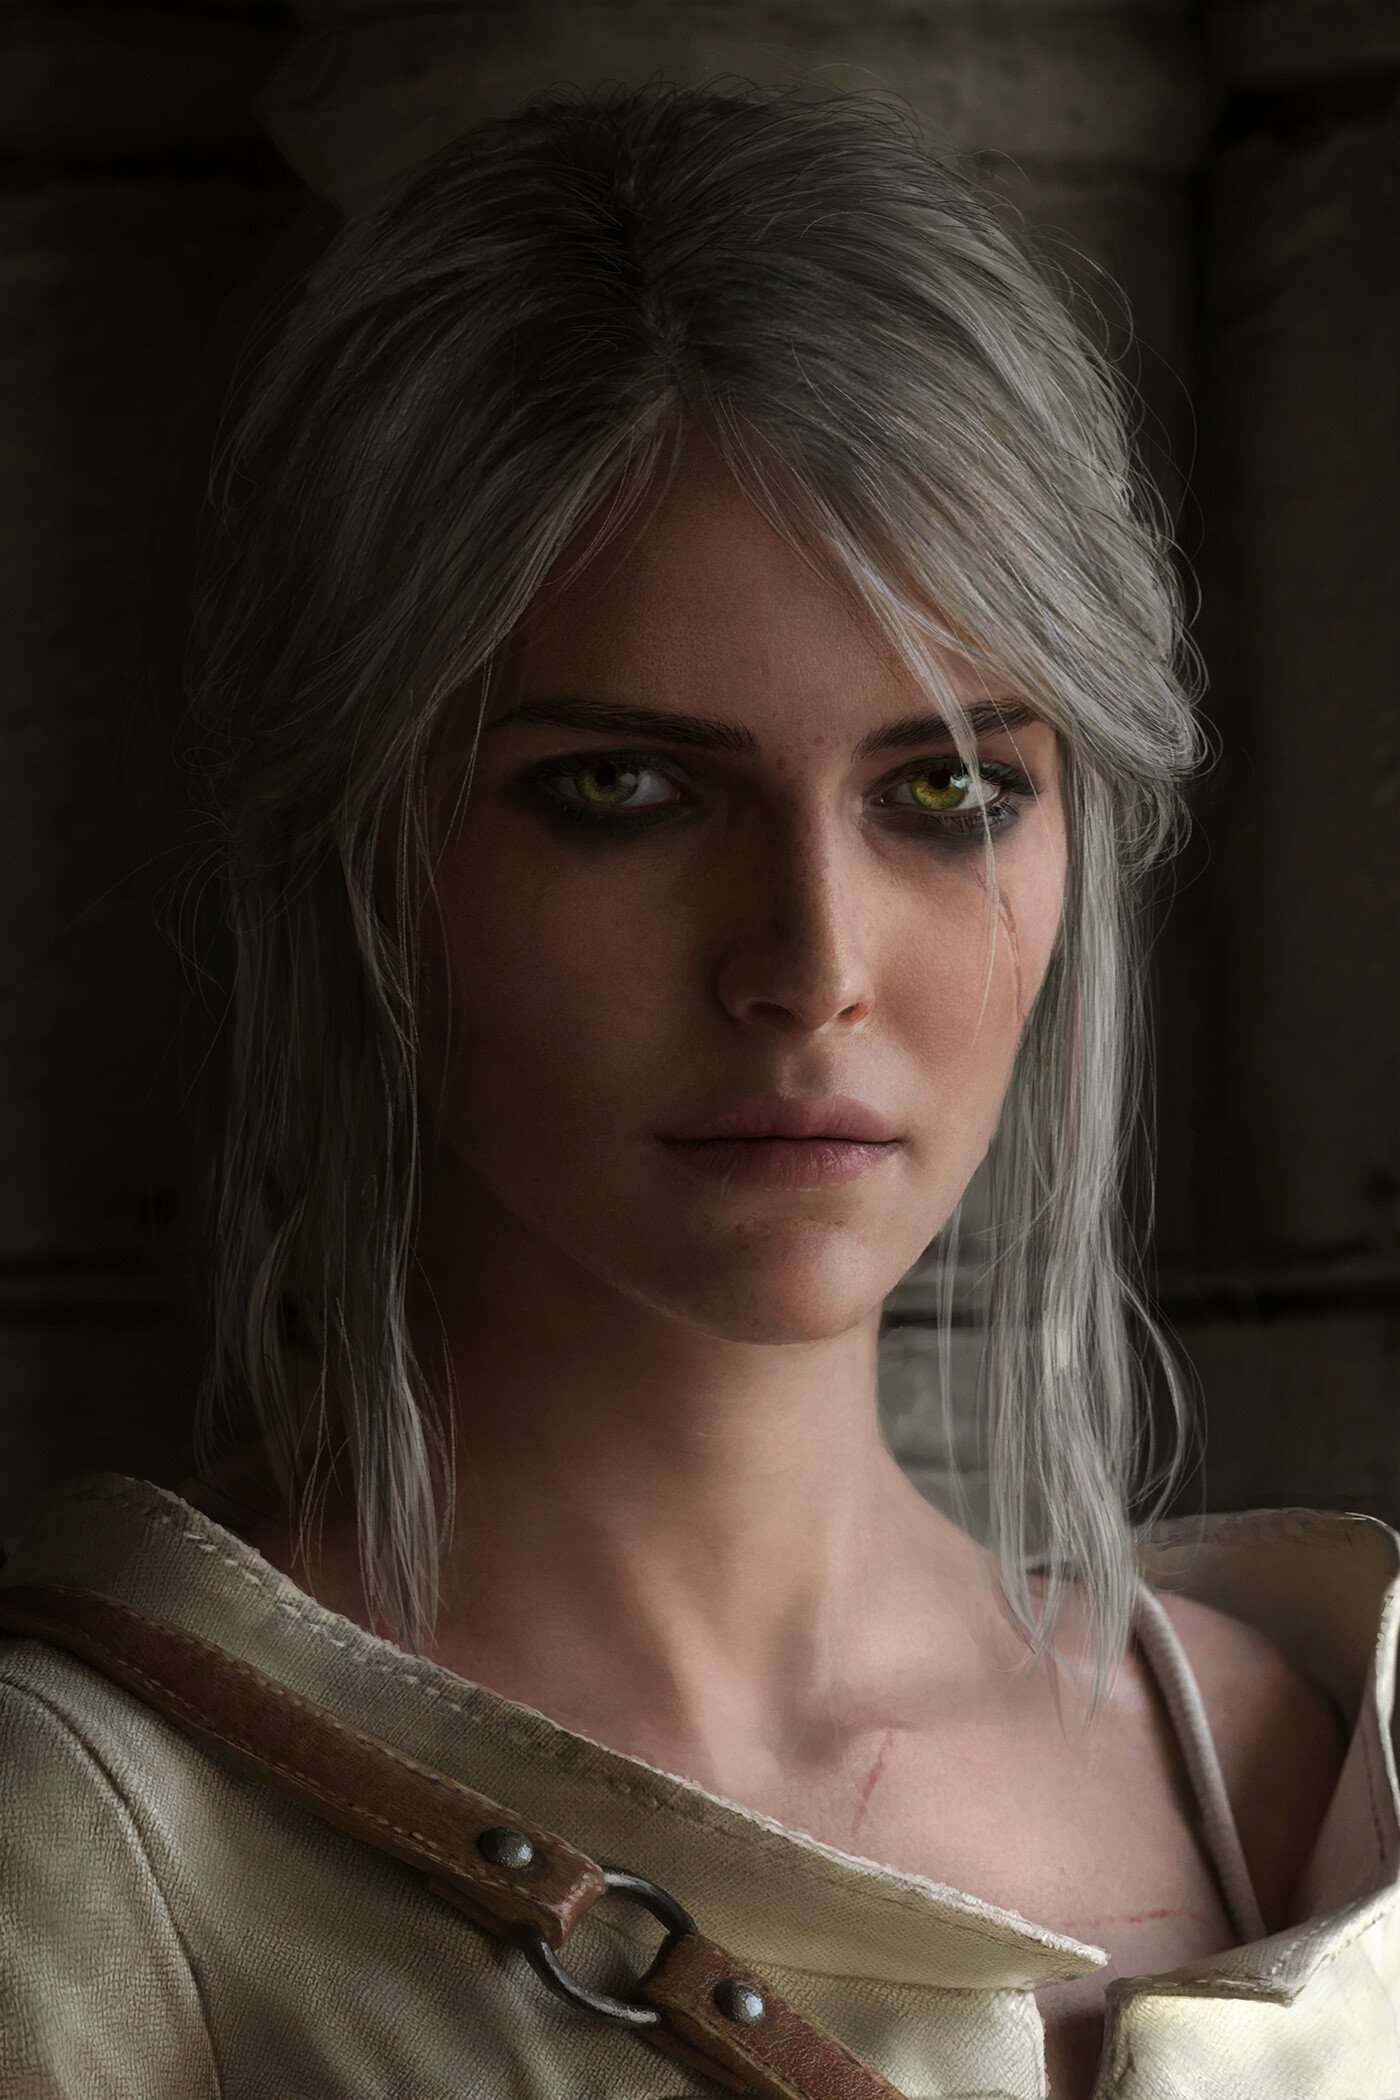 General 1400x2100 The Witcher The Witcher 3: Wild Hunt video games RPG portrait Cirilla Fiona Elen Riannon looking at viewer CD Projekt RED video game characters